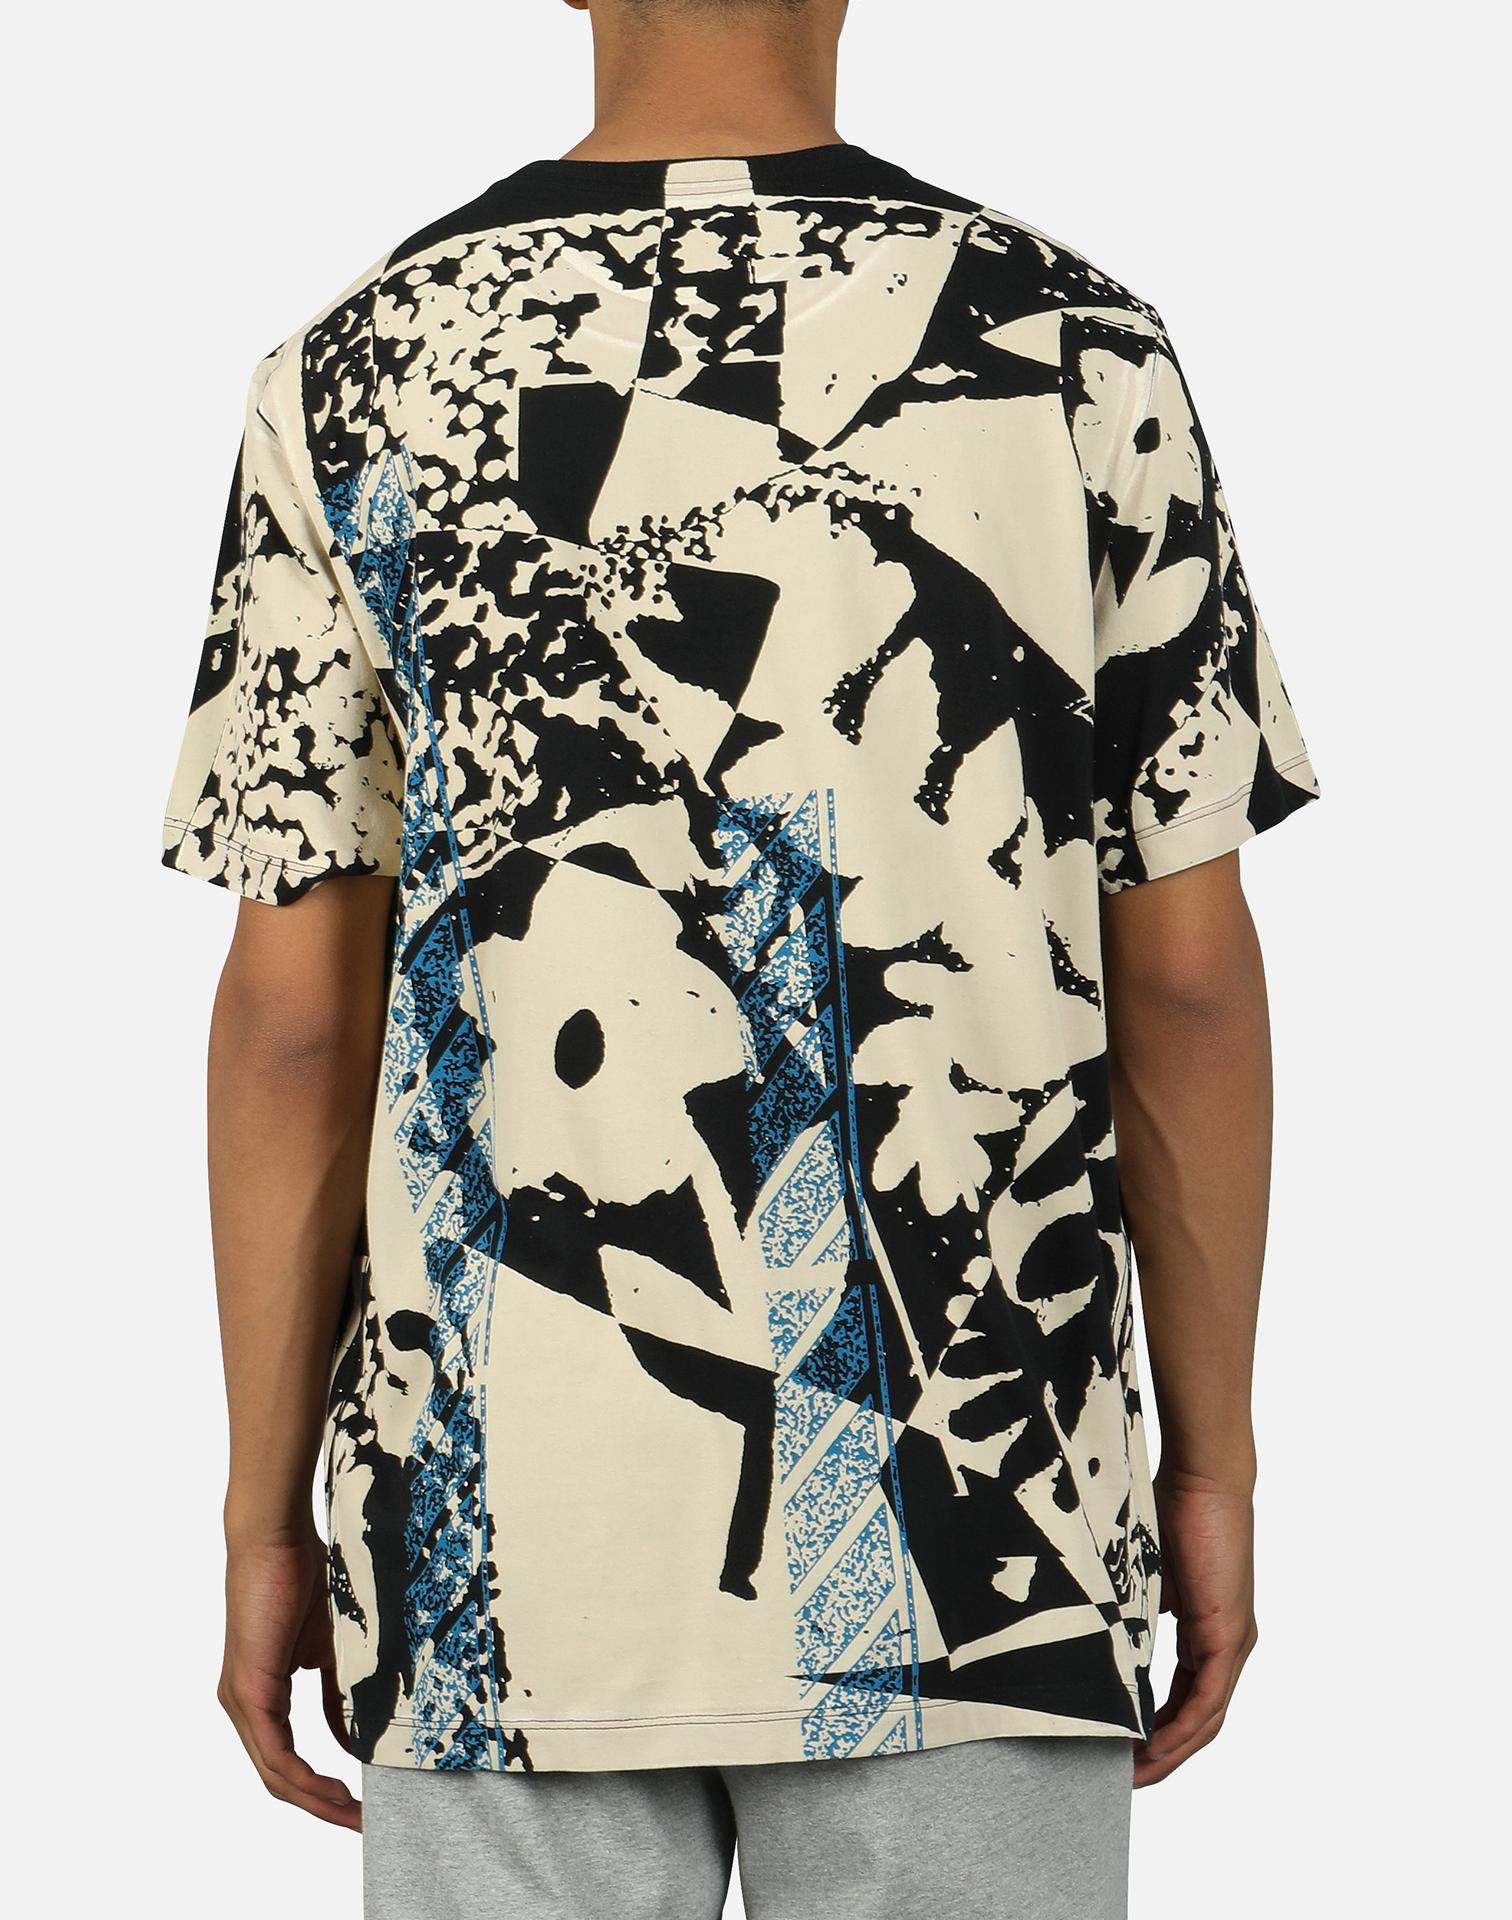 Nike Cotton Nsw Floral Stencil Tee in White for Men - Lyst